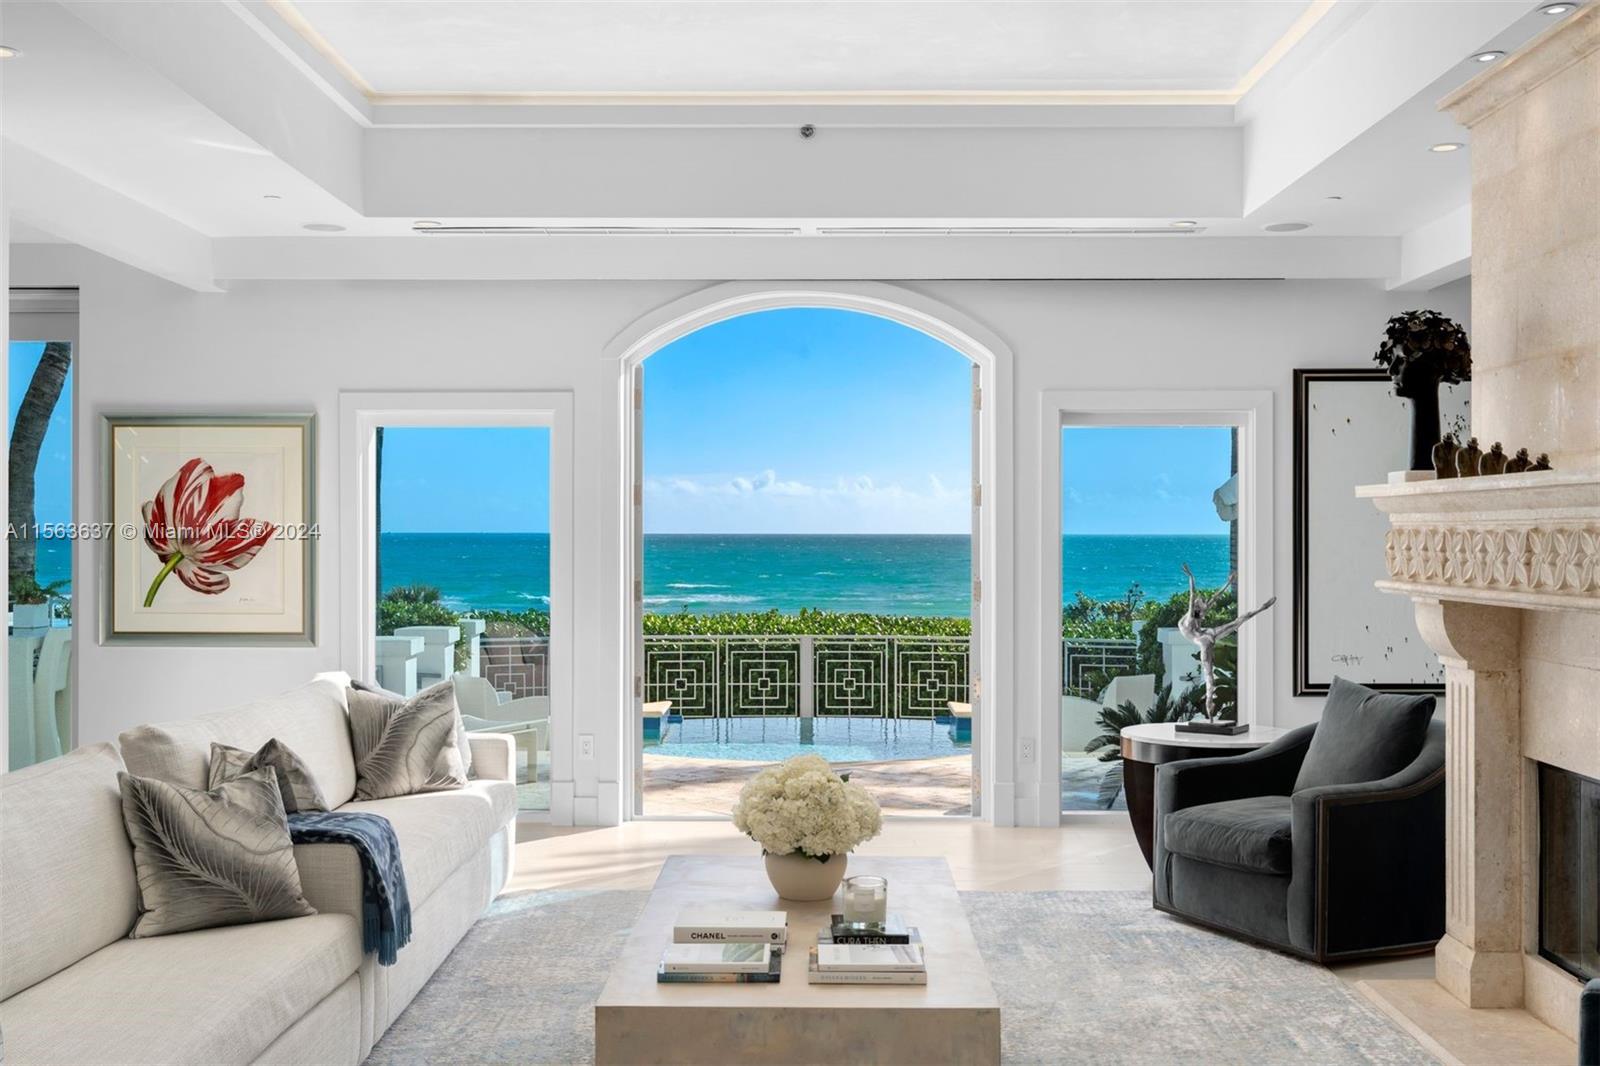 With only 6 Mediterranean-style villas available, this is a unique opportunity to rent this fully furnished gem in Miami Beach, granting easy access to dining, shopping & entertainment. Experience the epitome of luxury living at The Bath Club, a distinguished residential address perched right on the shores of the majestic Atlantic Ocean. This oceanfront oasis offers rare villas w/ breathtaking views of the azure waters. As a resident, you'll enjoy a prestigious private club w/5-star amenities, from a spa & tennis court to a lap pool & 24/7 concierge. The 4 level estate features a state-of-the-art kitchen, beachfront pool, private elevator & rooftop. The principal suite offers opulence w/an oversized walk-in closet & lavish bathroom. Embrace the rare chance to call this private resort home.